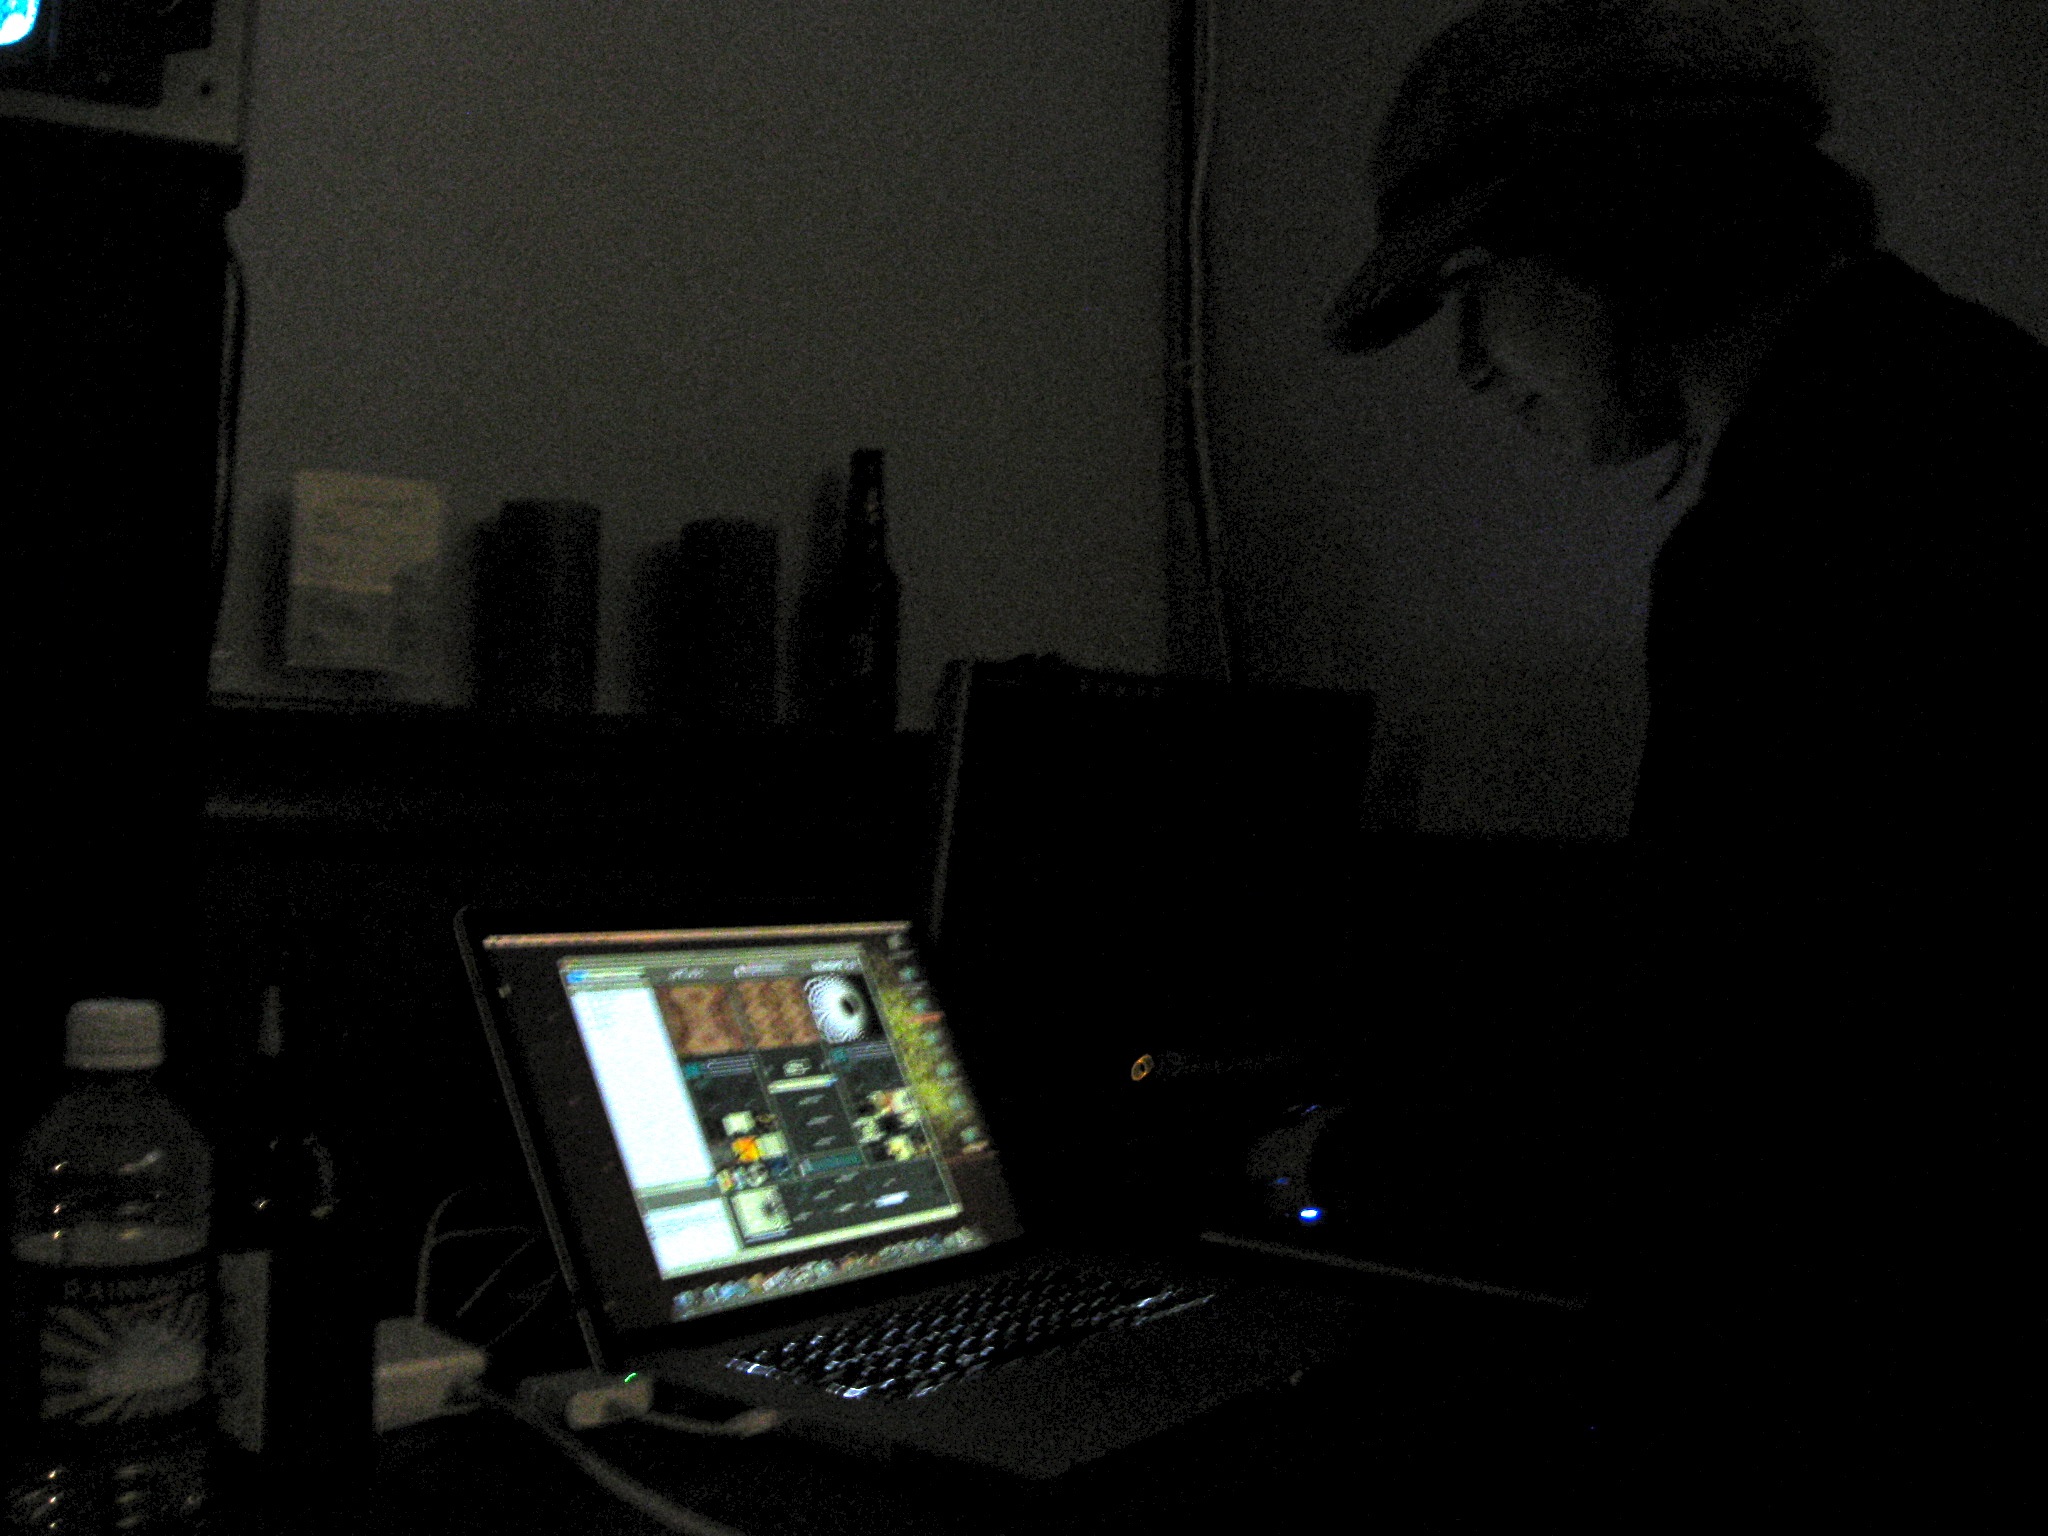 a laptop is lit up on a desk in the dark